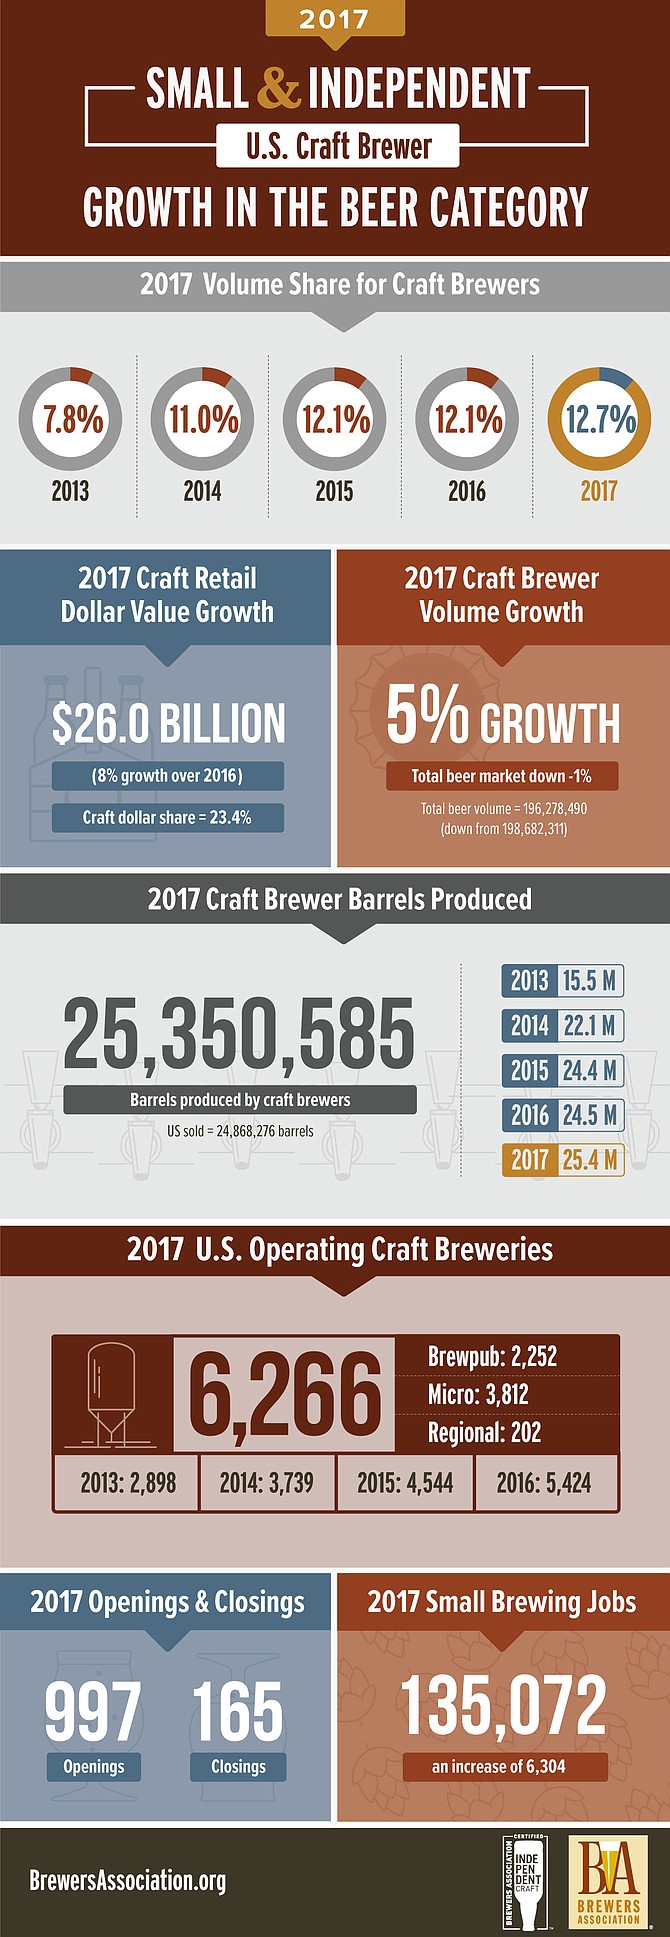 Craft beer numbers for 2017, infographic courtesy the Brewers Association.